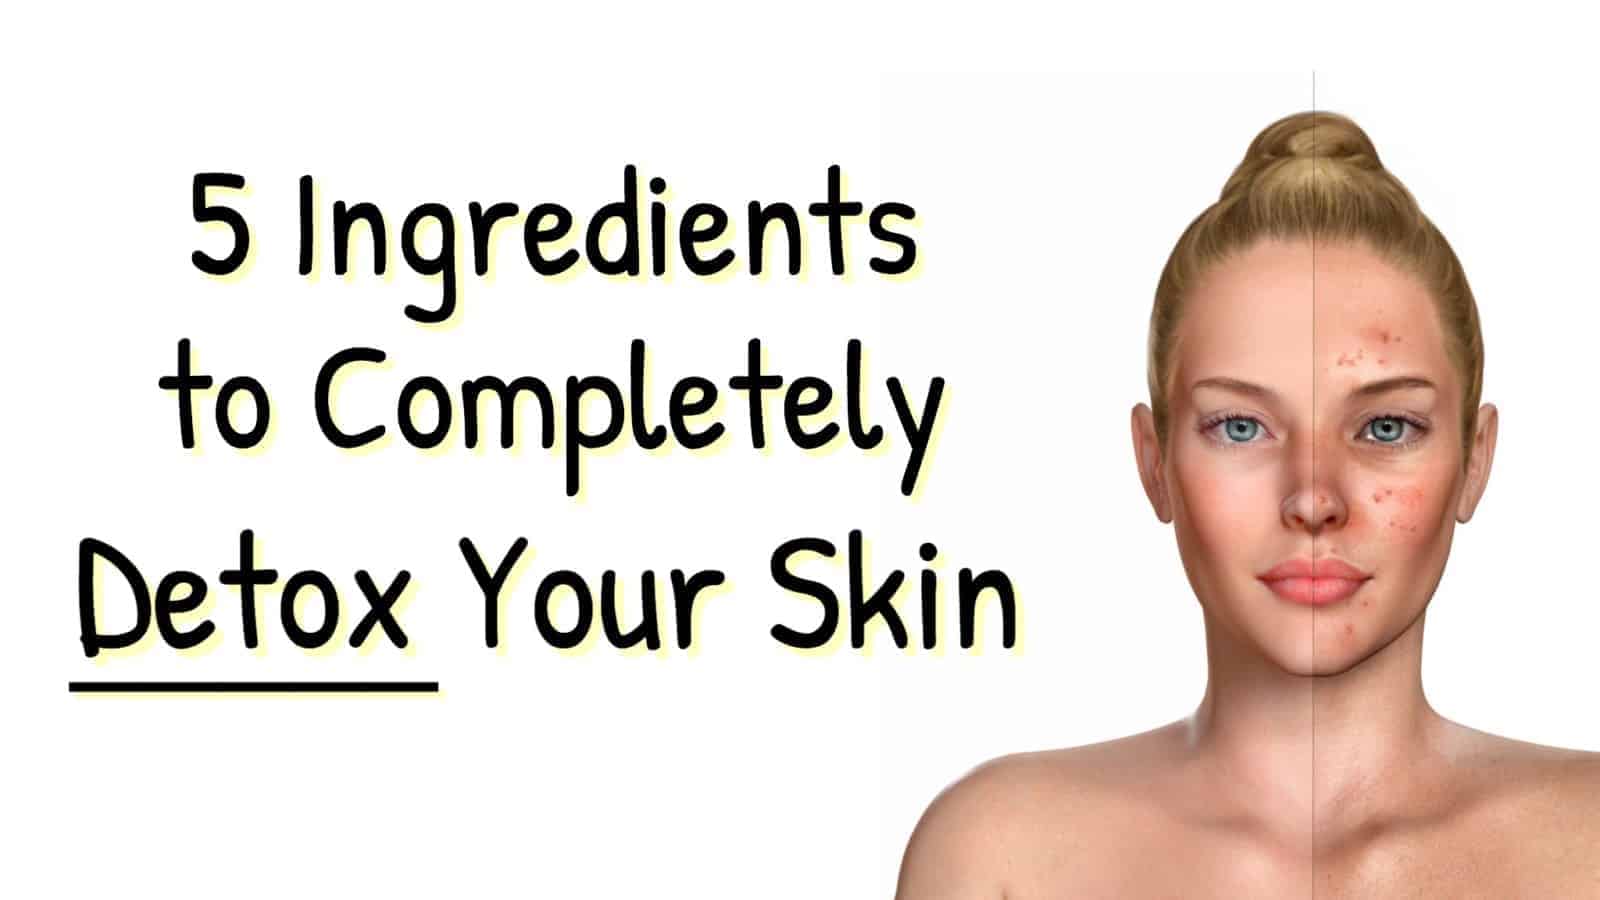 5 Ingredients to Completely Detox Your Skin